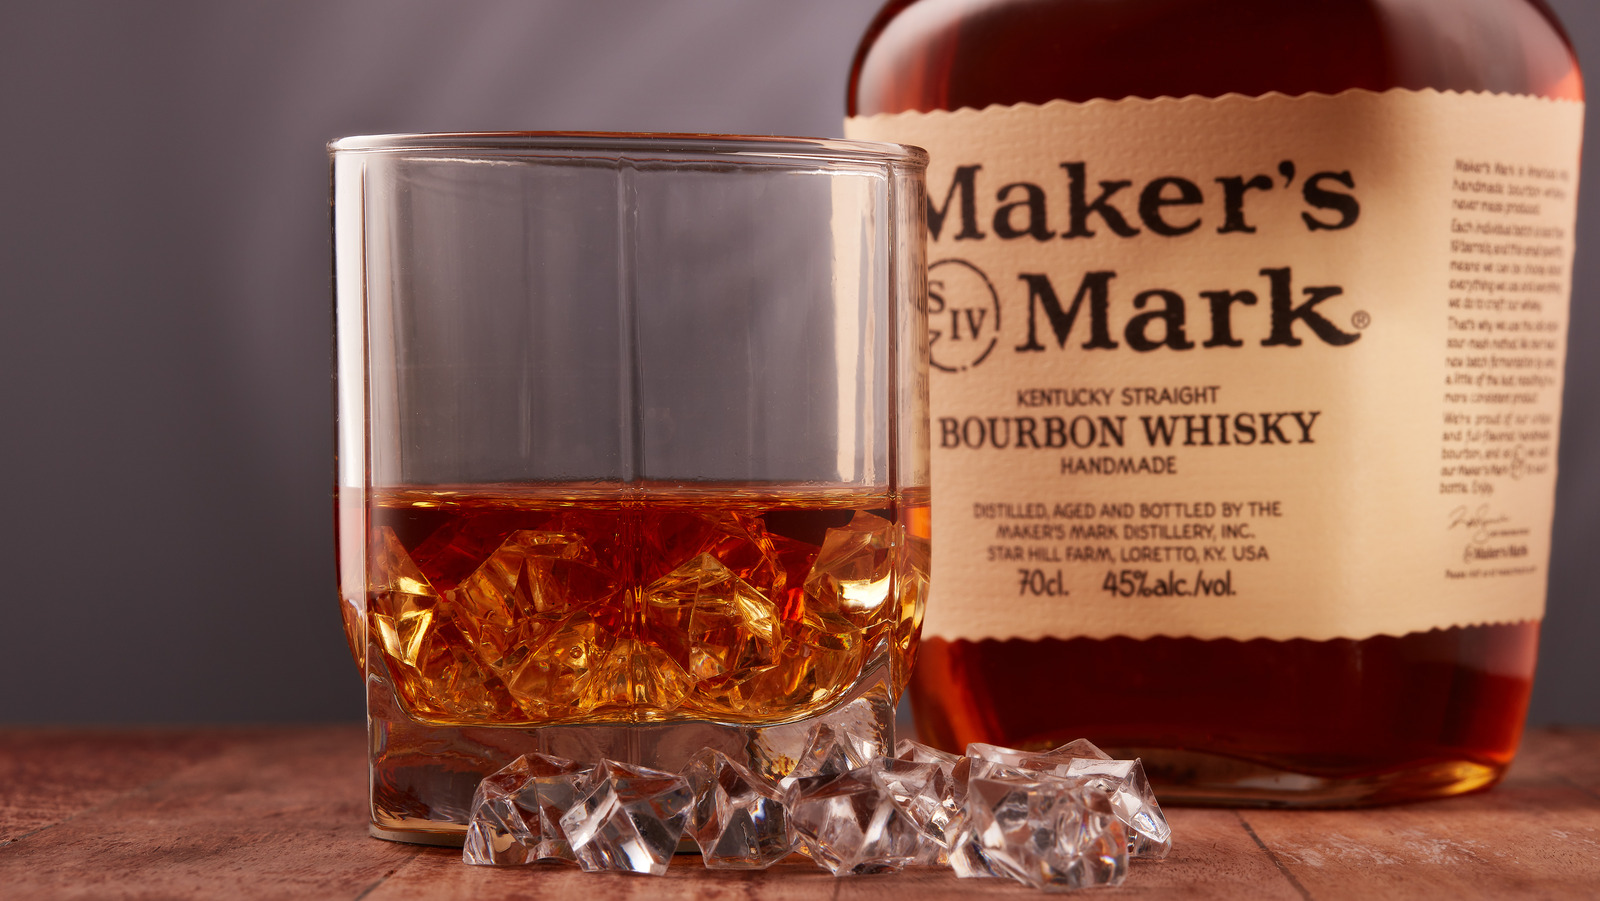 Ranking The Big Bourbon Brands, From Worst To Best